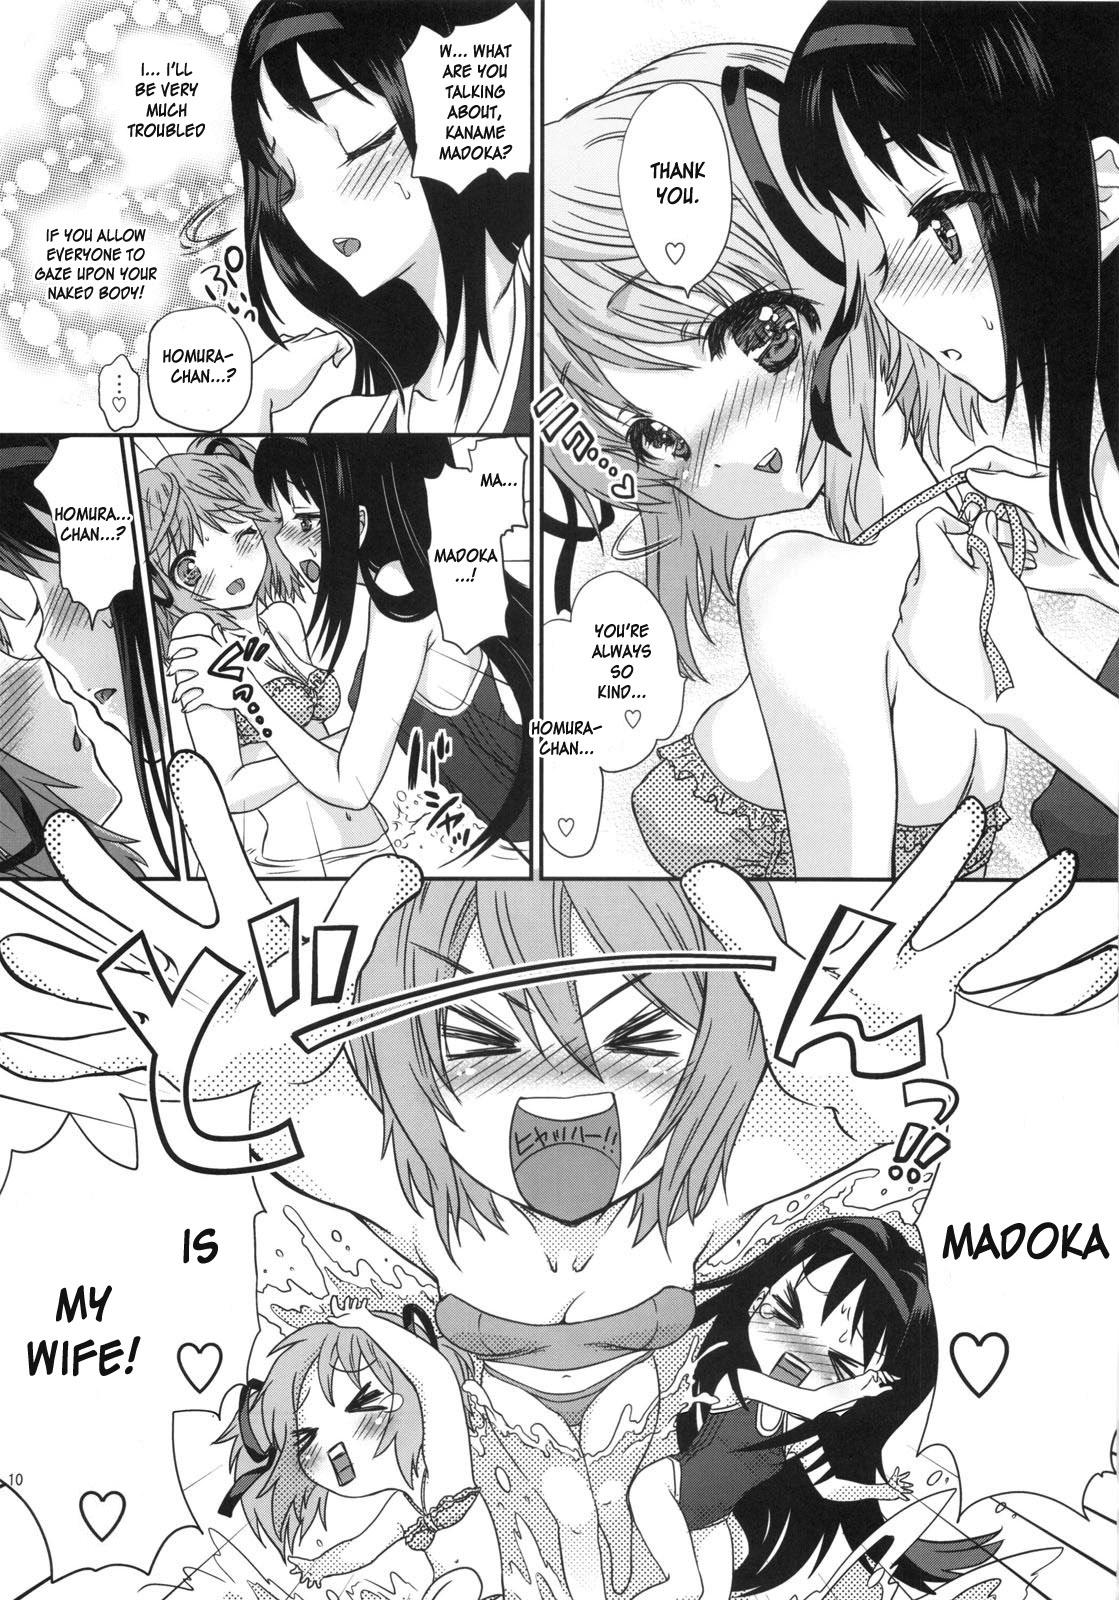 Hot Wife LOVE CONNECT - Puella magi madoka magica Tight Pussy Fucked - Page 10